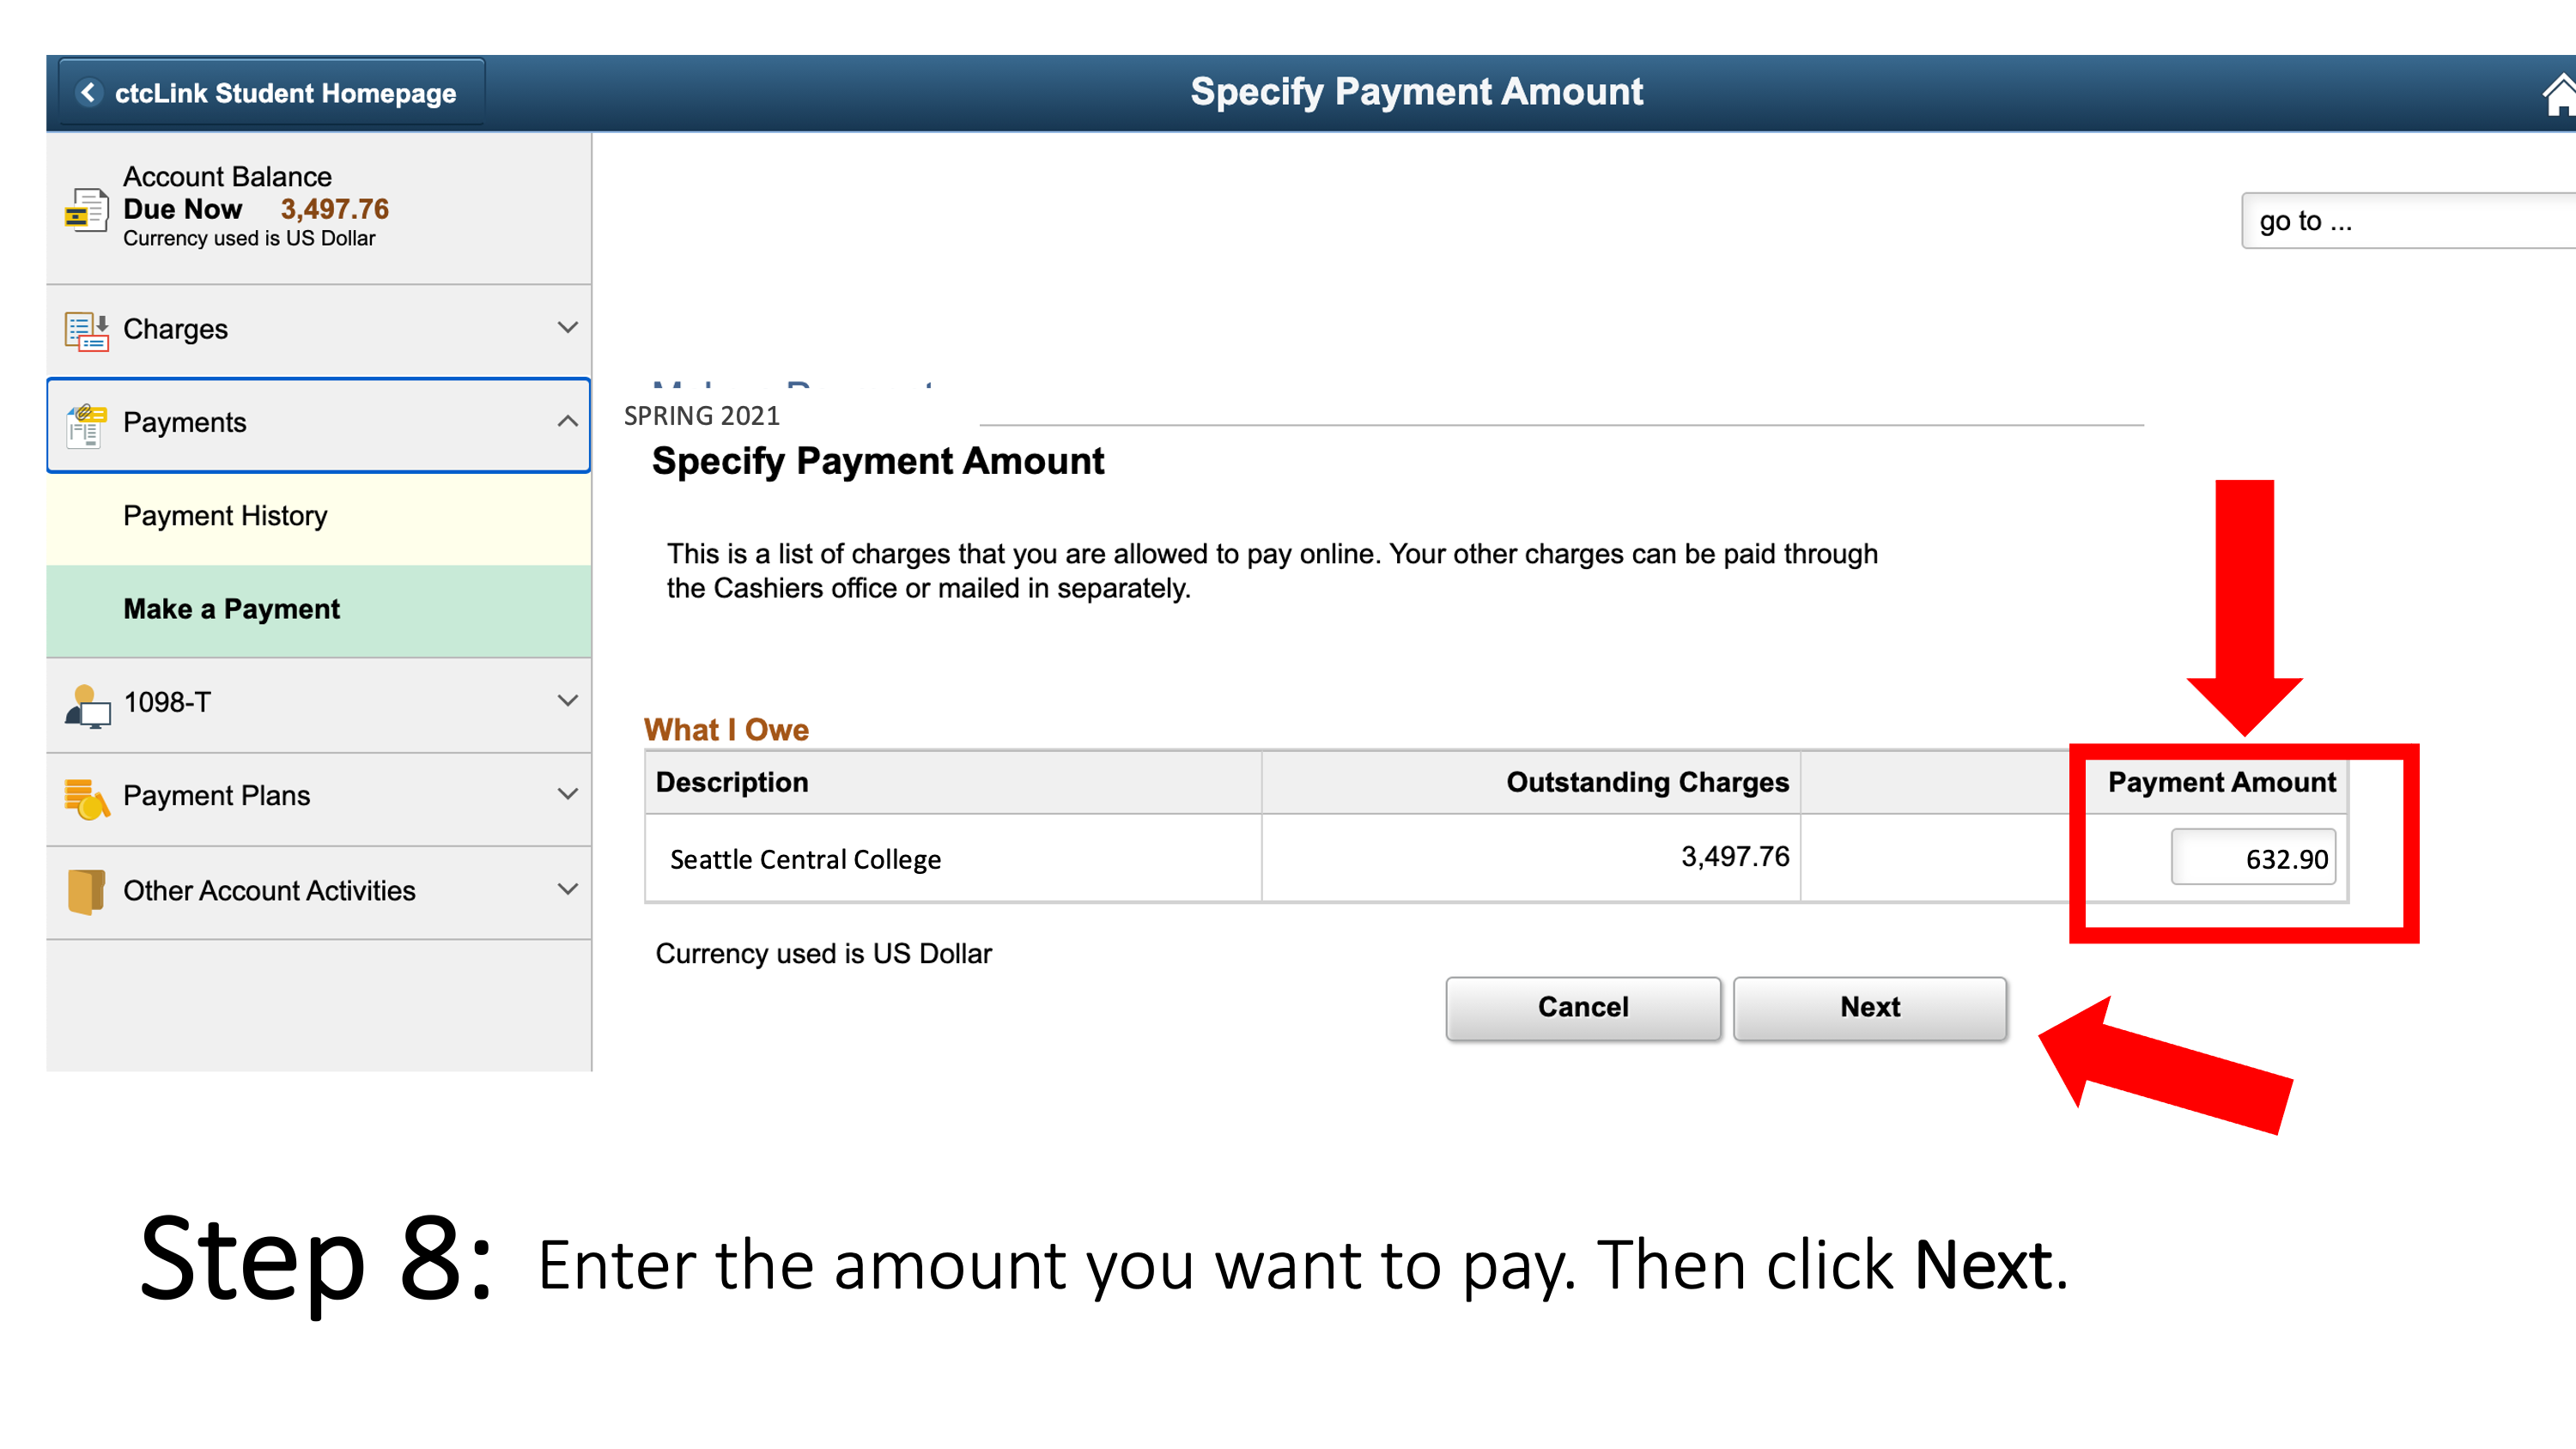 Enter the amount you want to pay. Then click Next.